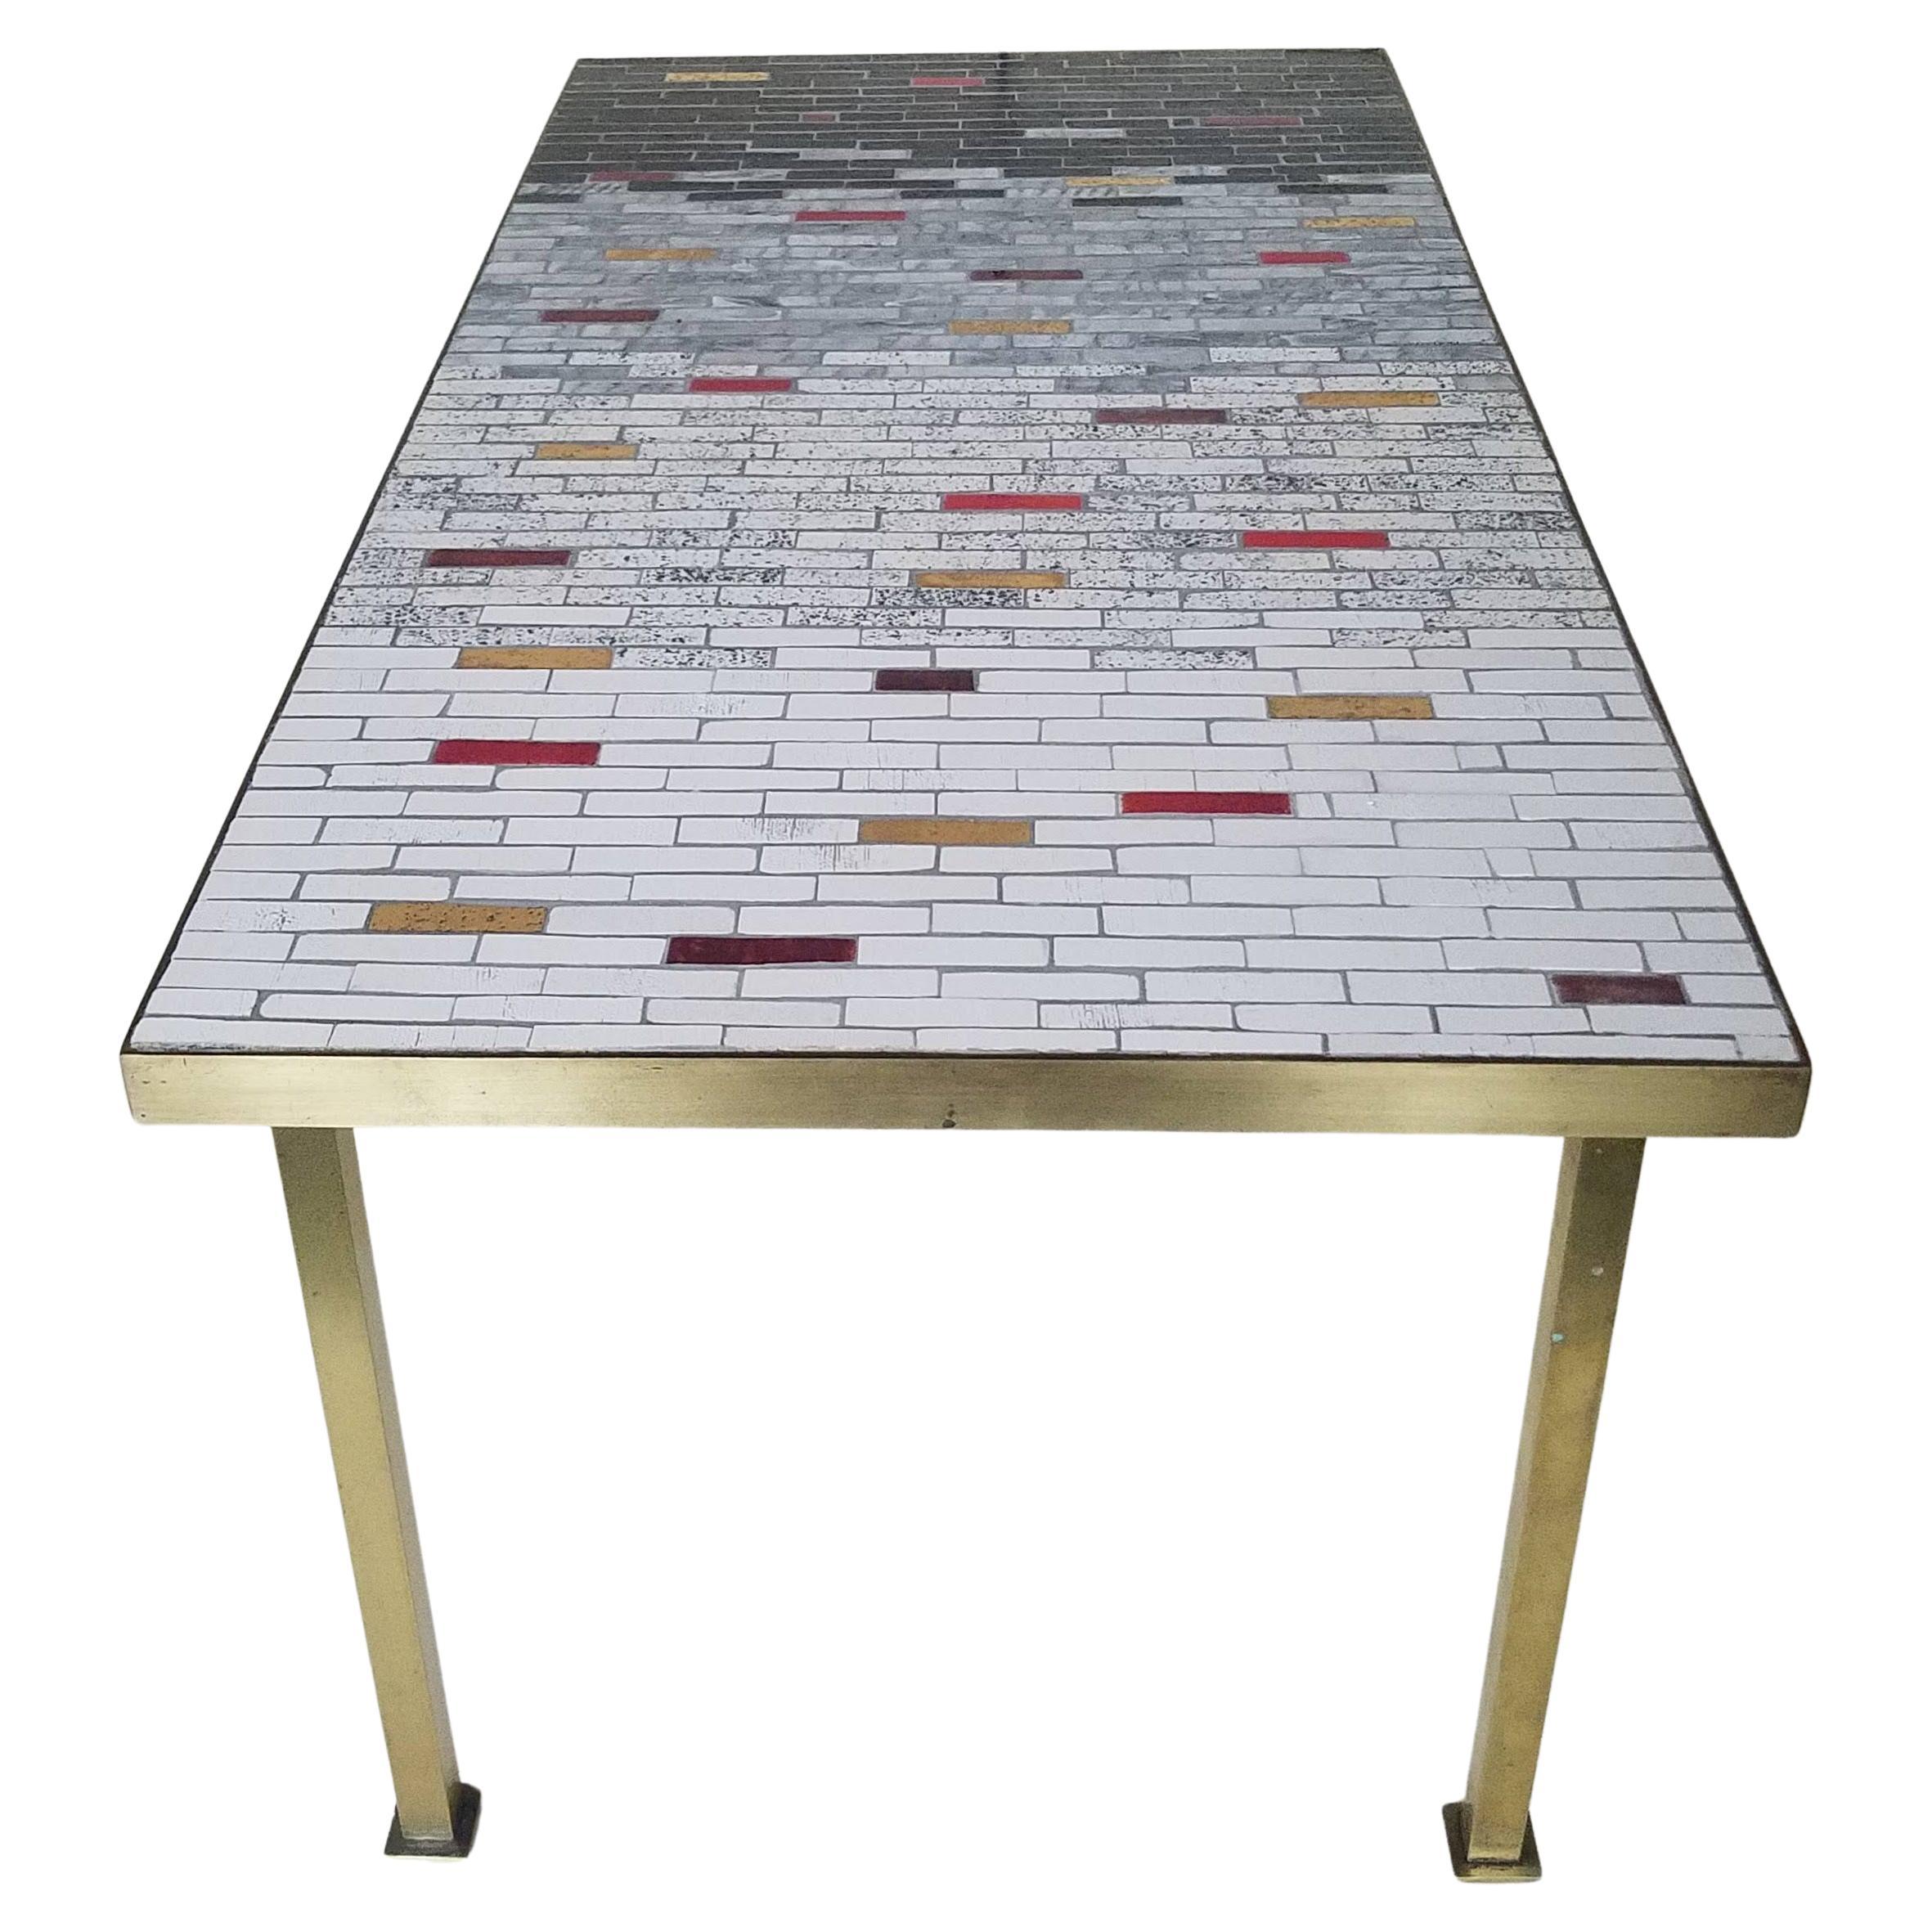 Hand Crafted Mosaic Tile Brass Framed Coffee Table York City Studio, c. 1950